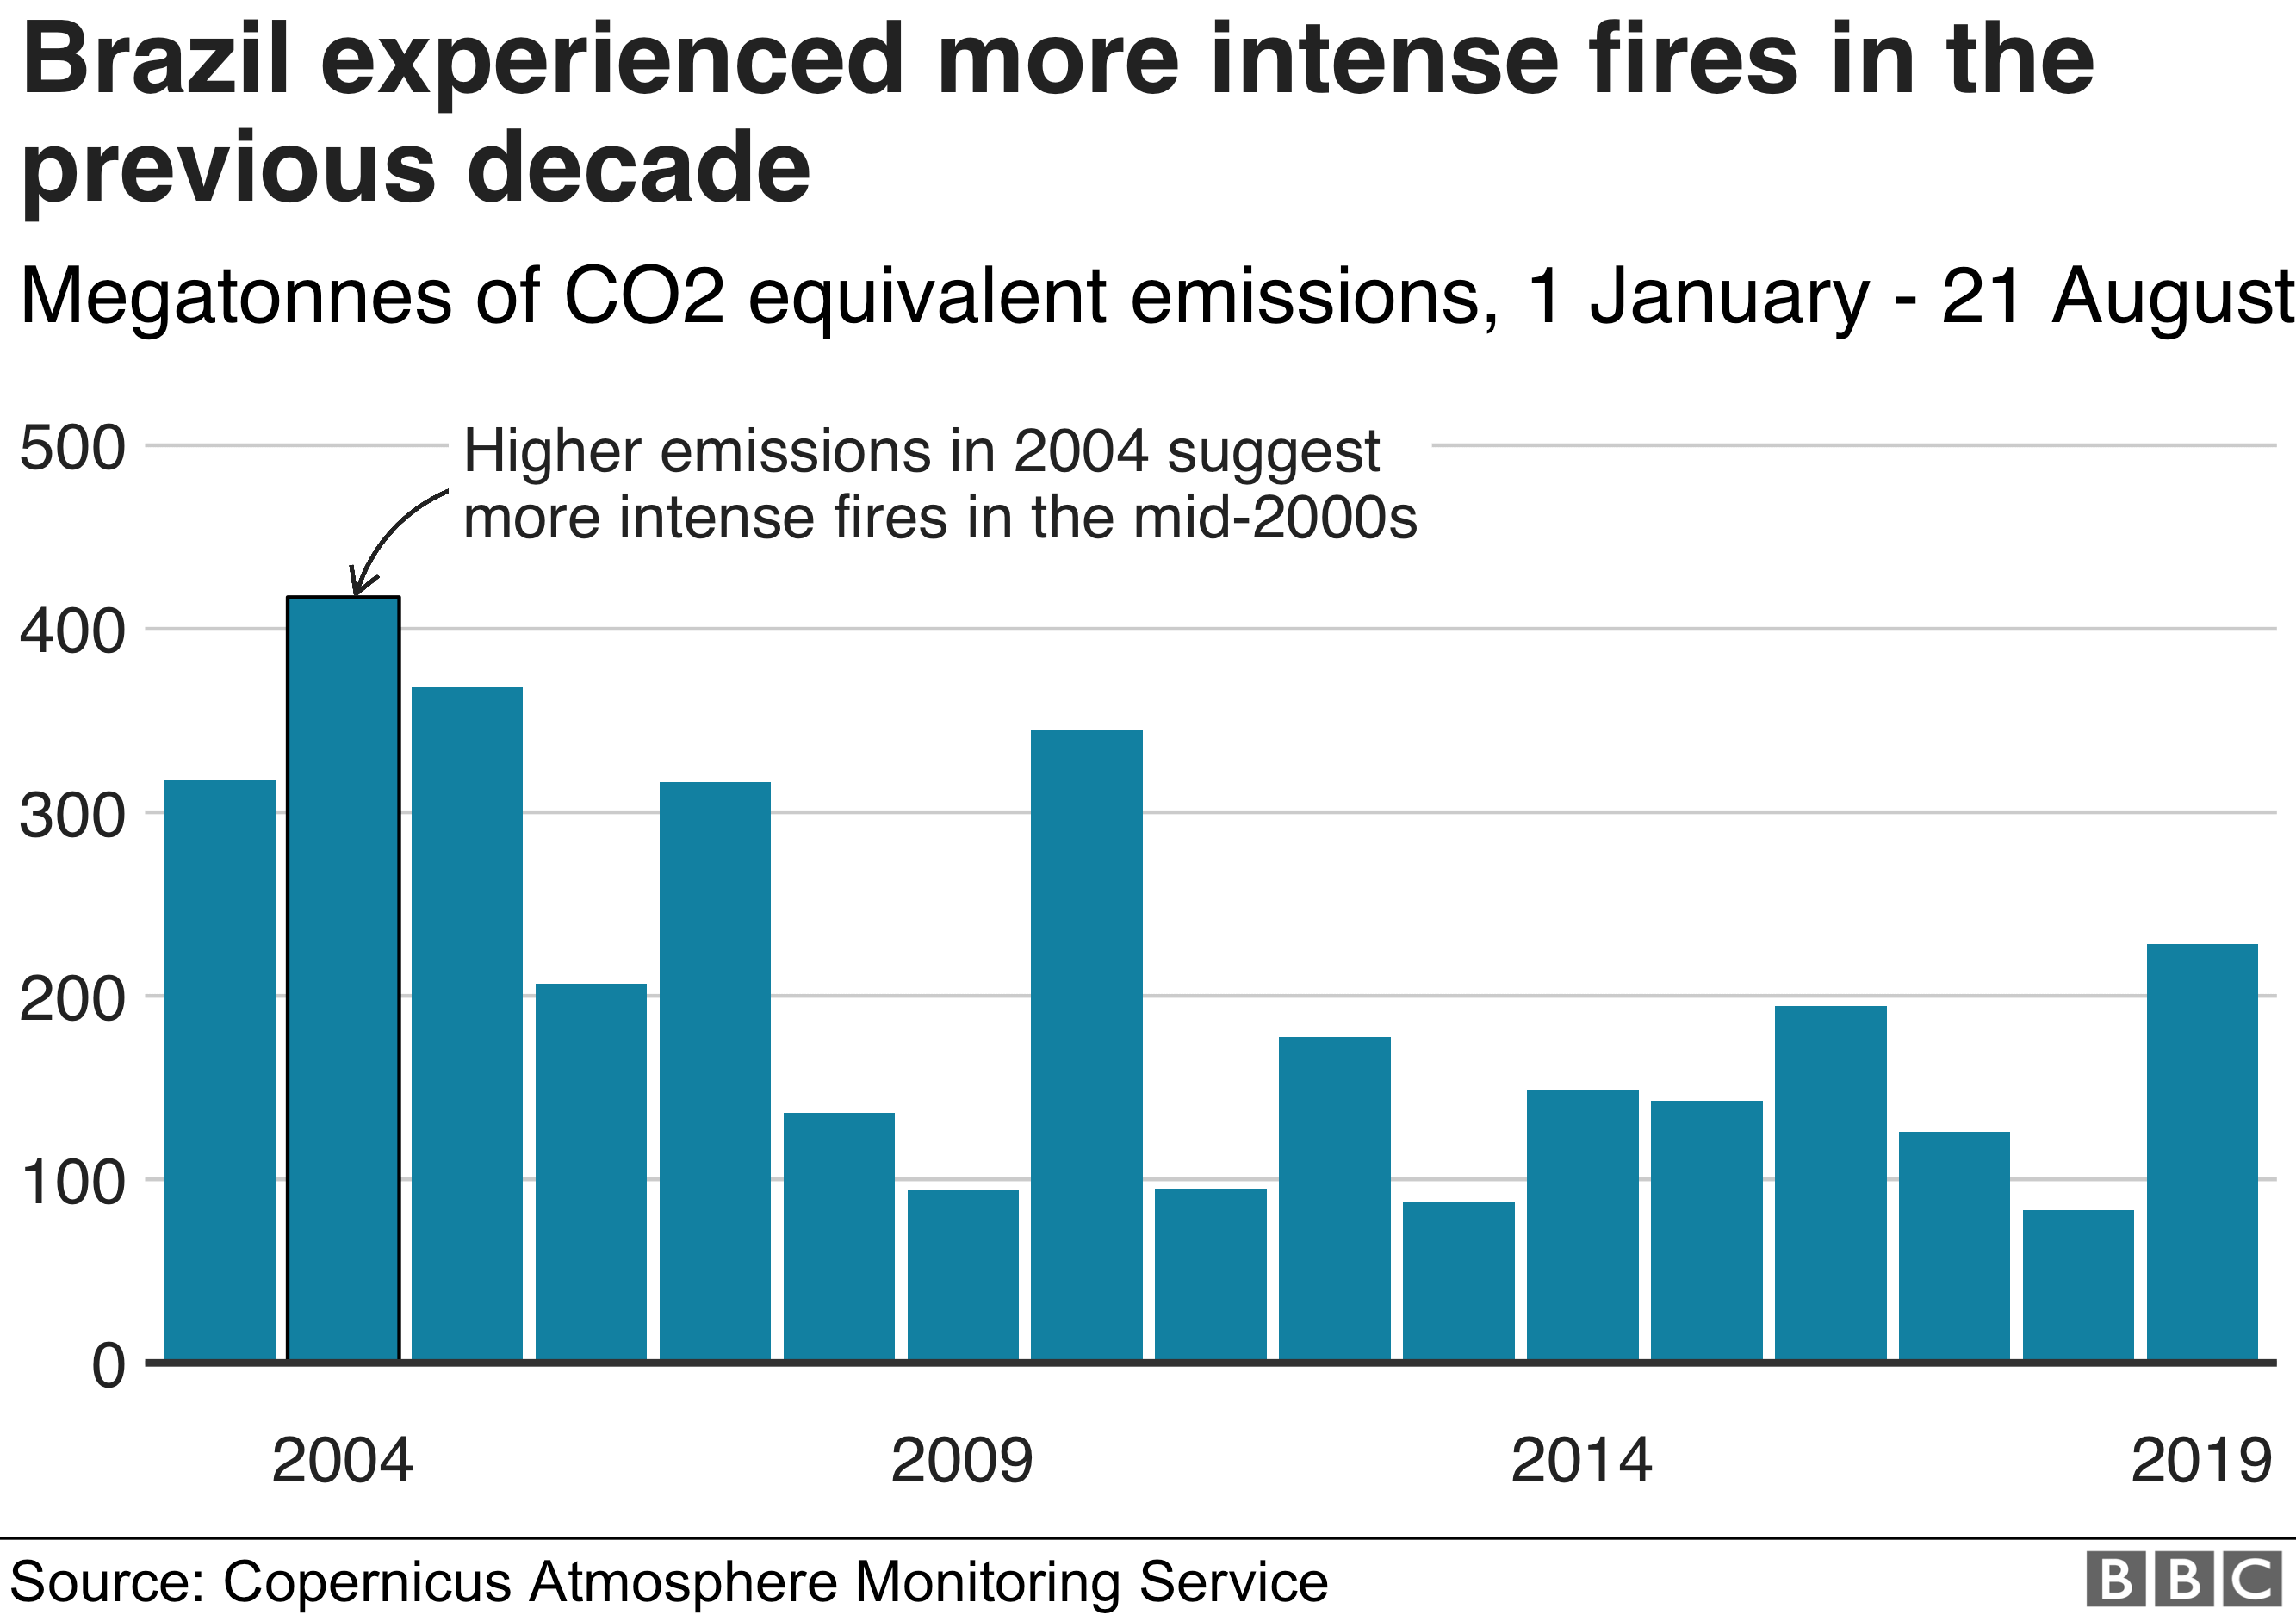 Bar chart showing CO2 emissions from Amazon fires in Brazil